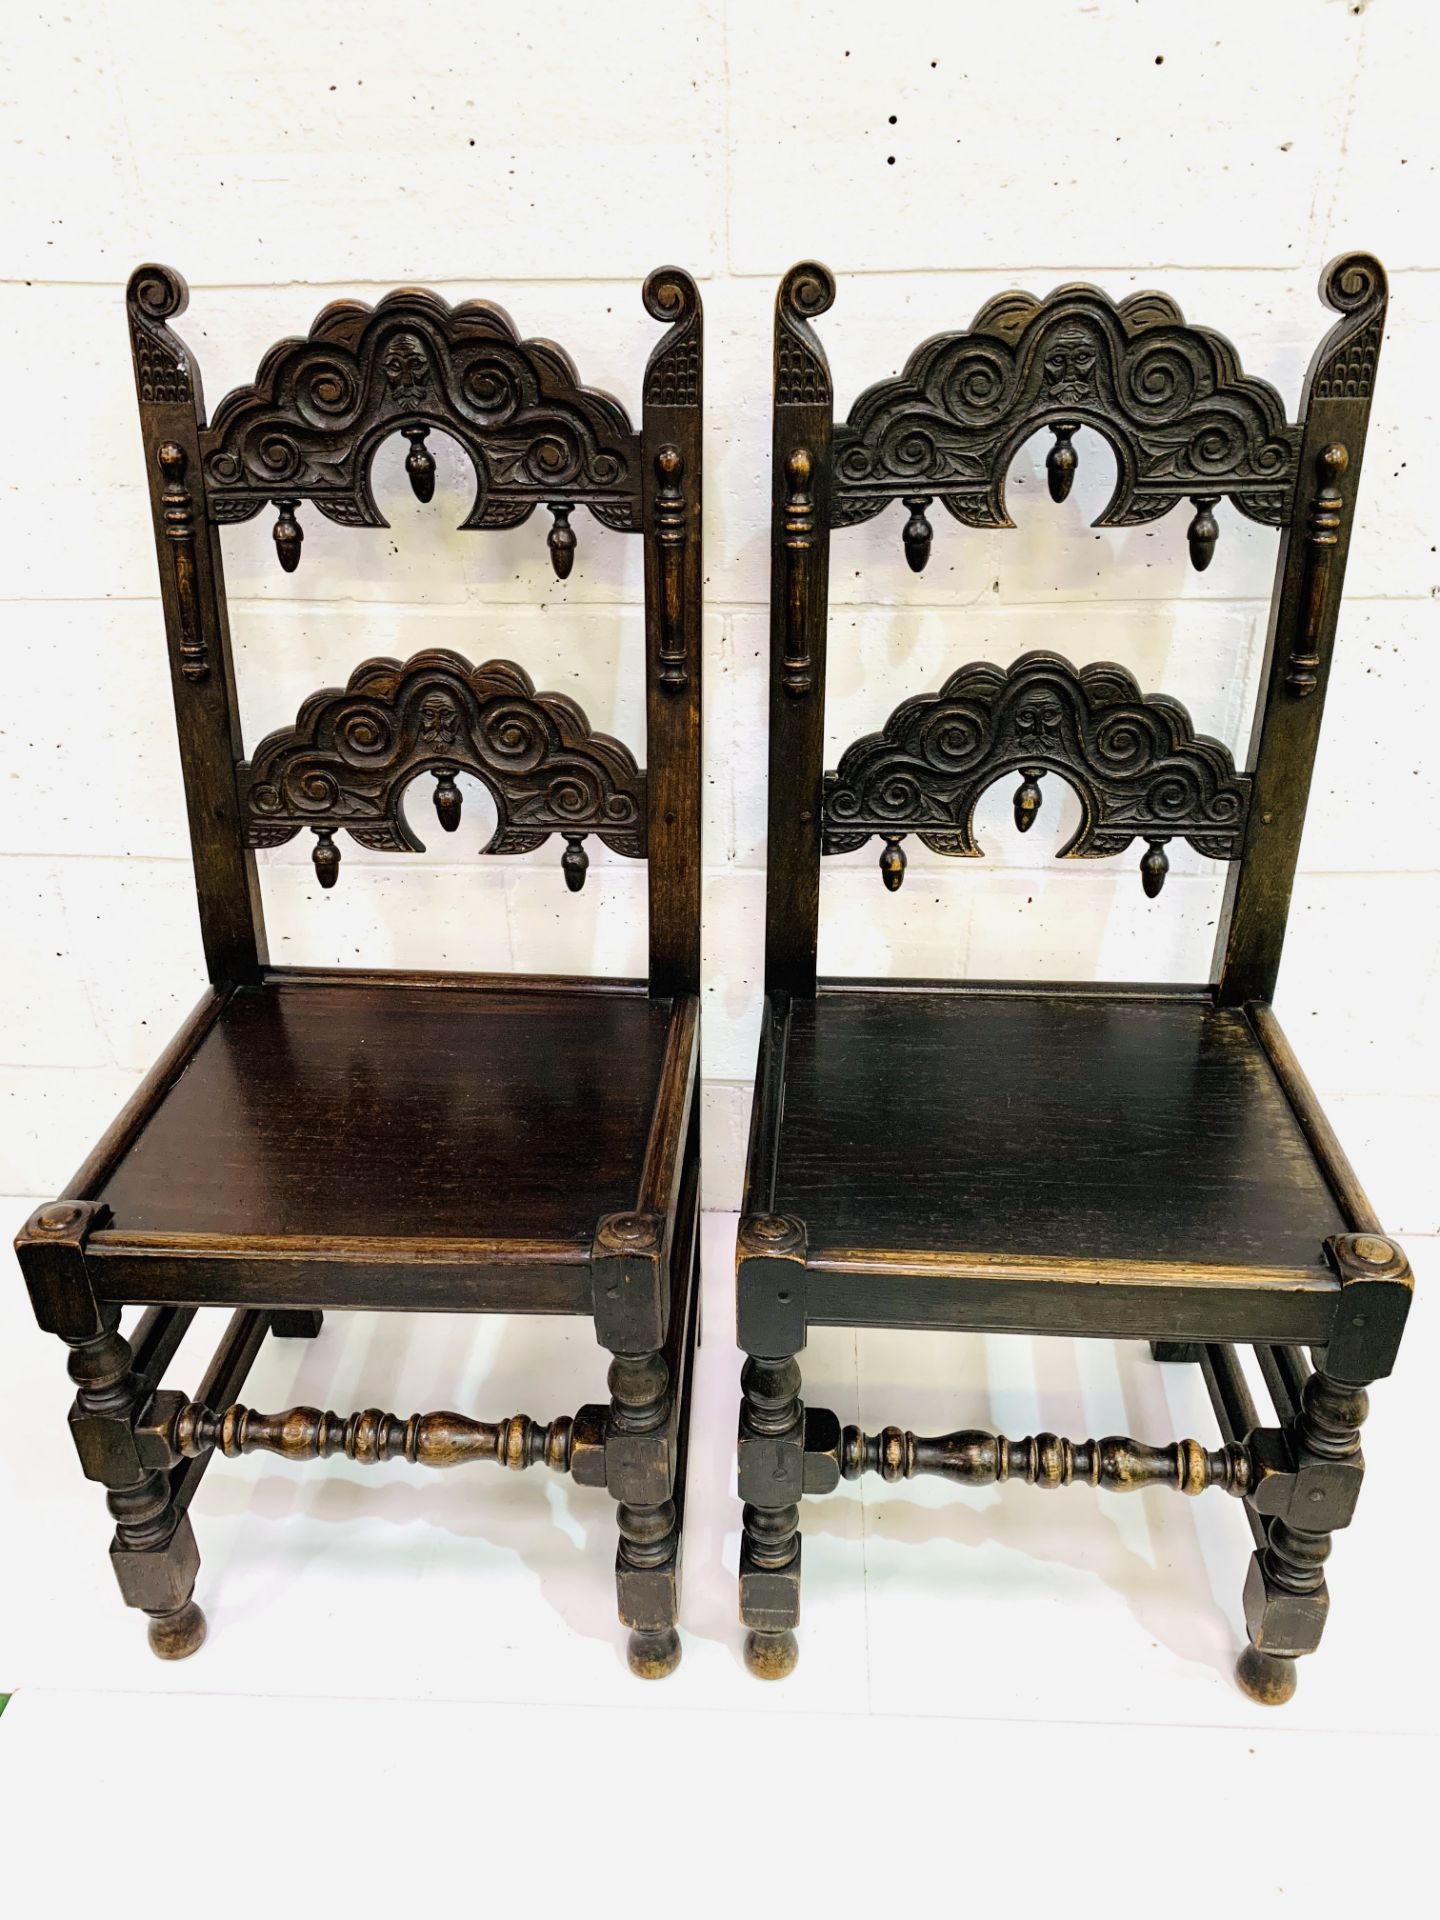 Two oak hall chairs with decorative splats